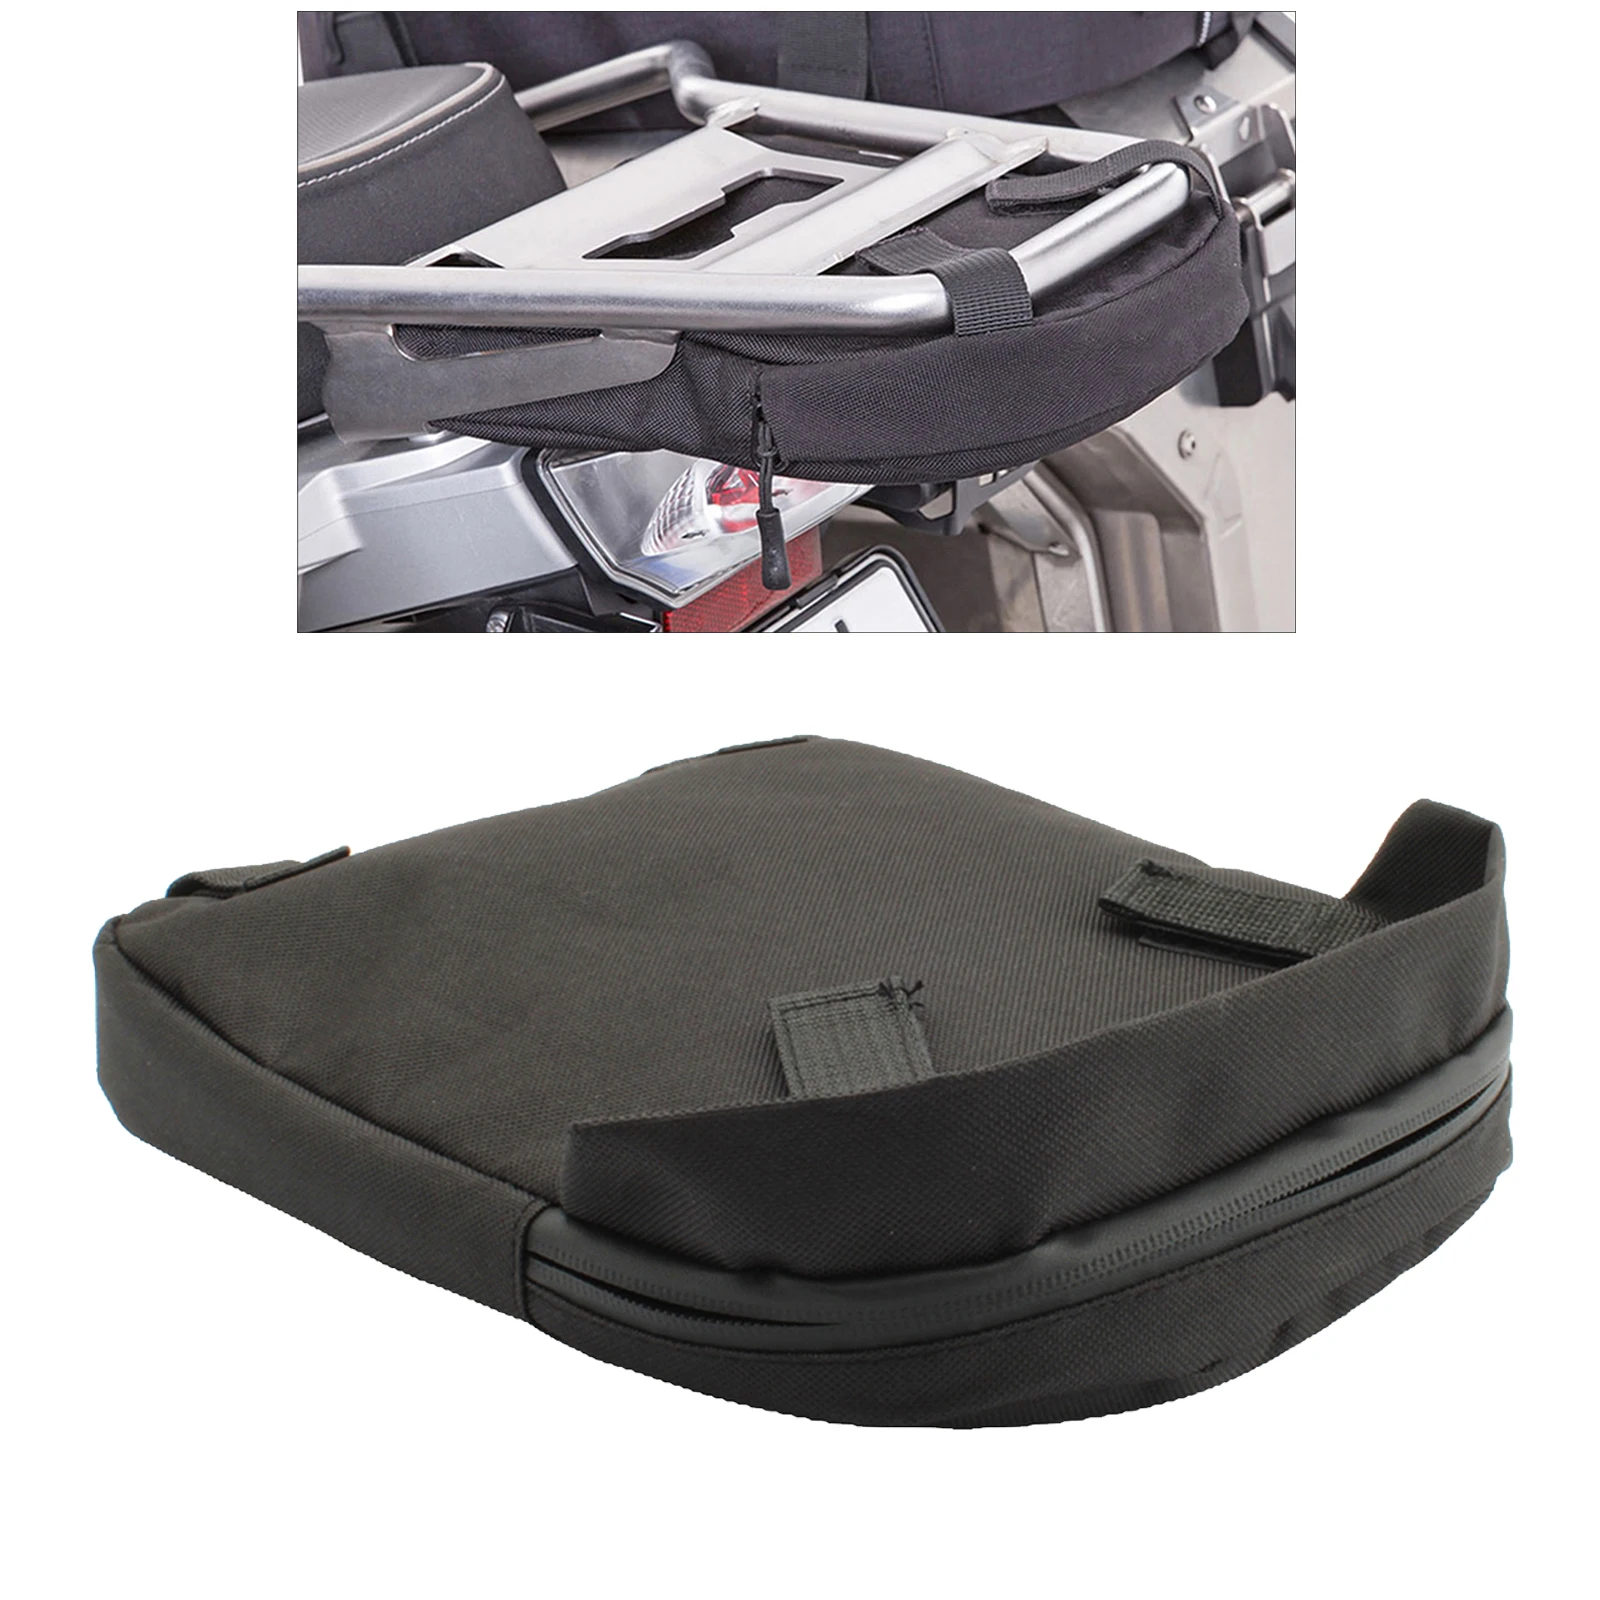 Waterproof Motorcycle Rear Under Luggage Rack Bag Tail Bag Storage Case For BMW R1250 GS Adventure R1200 GS LC Adv (2014-)